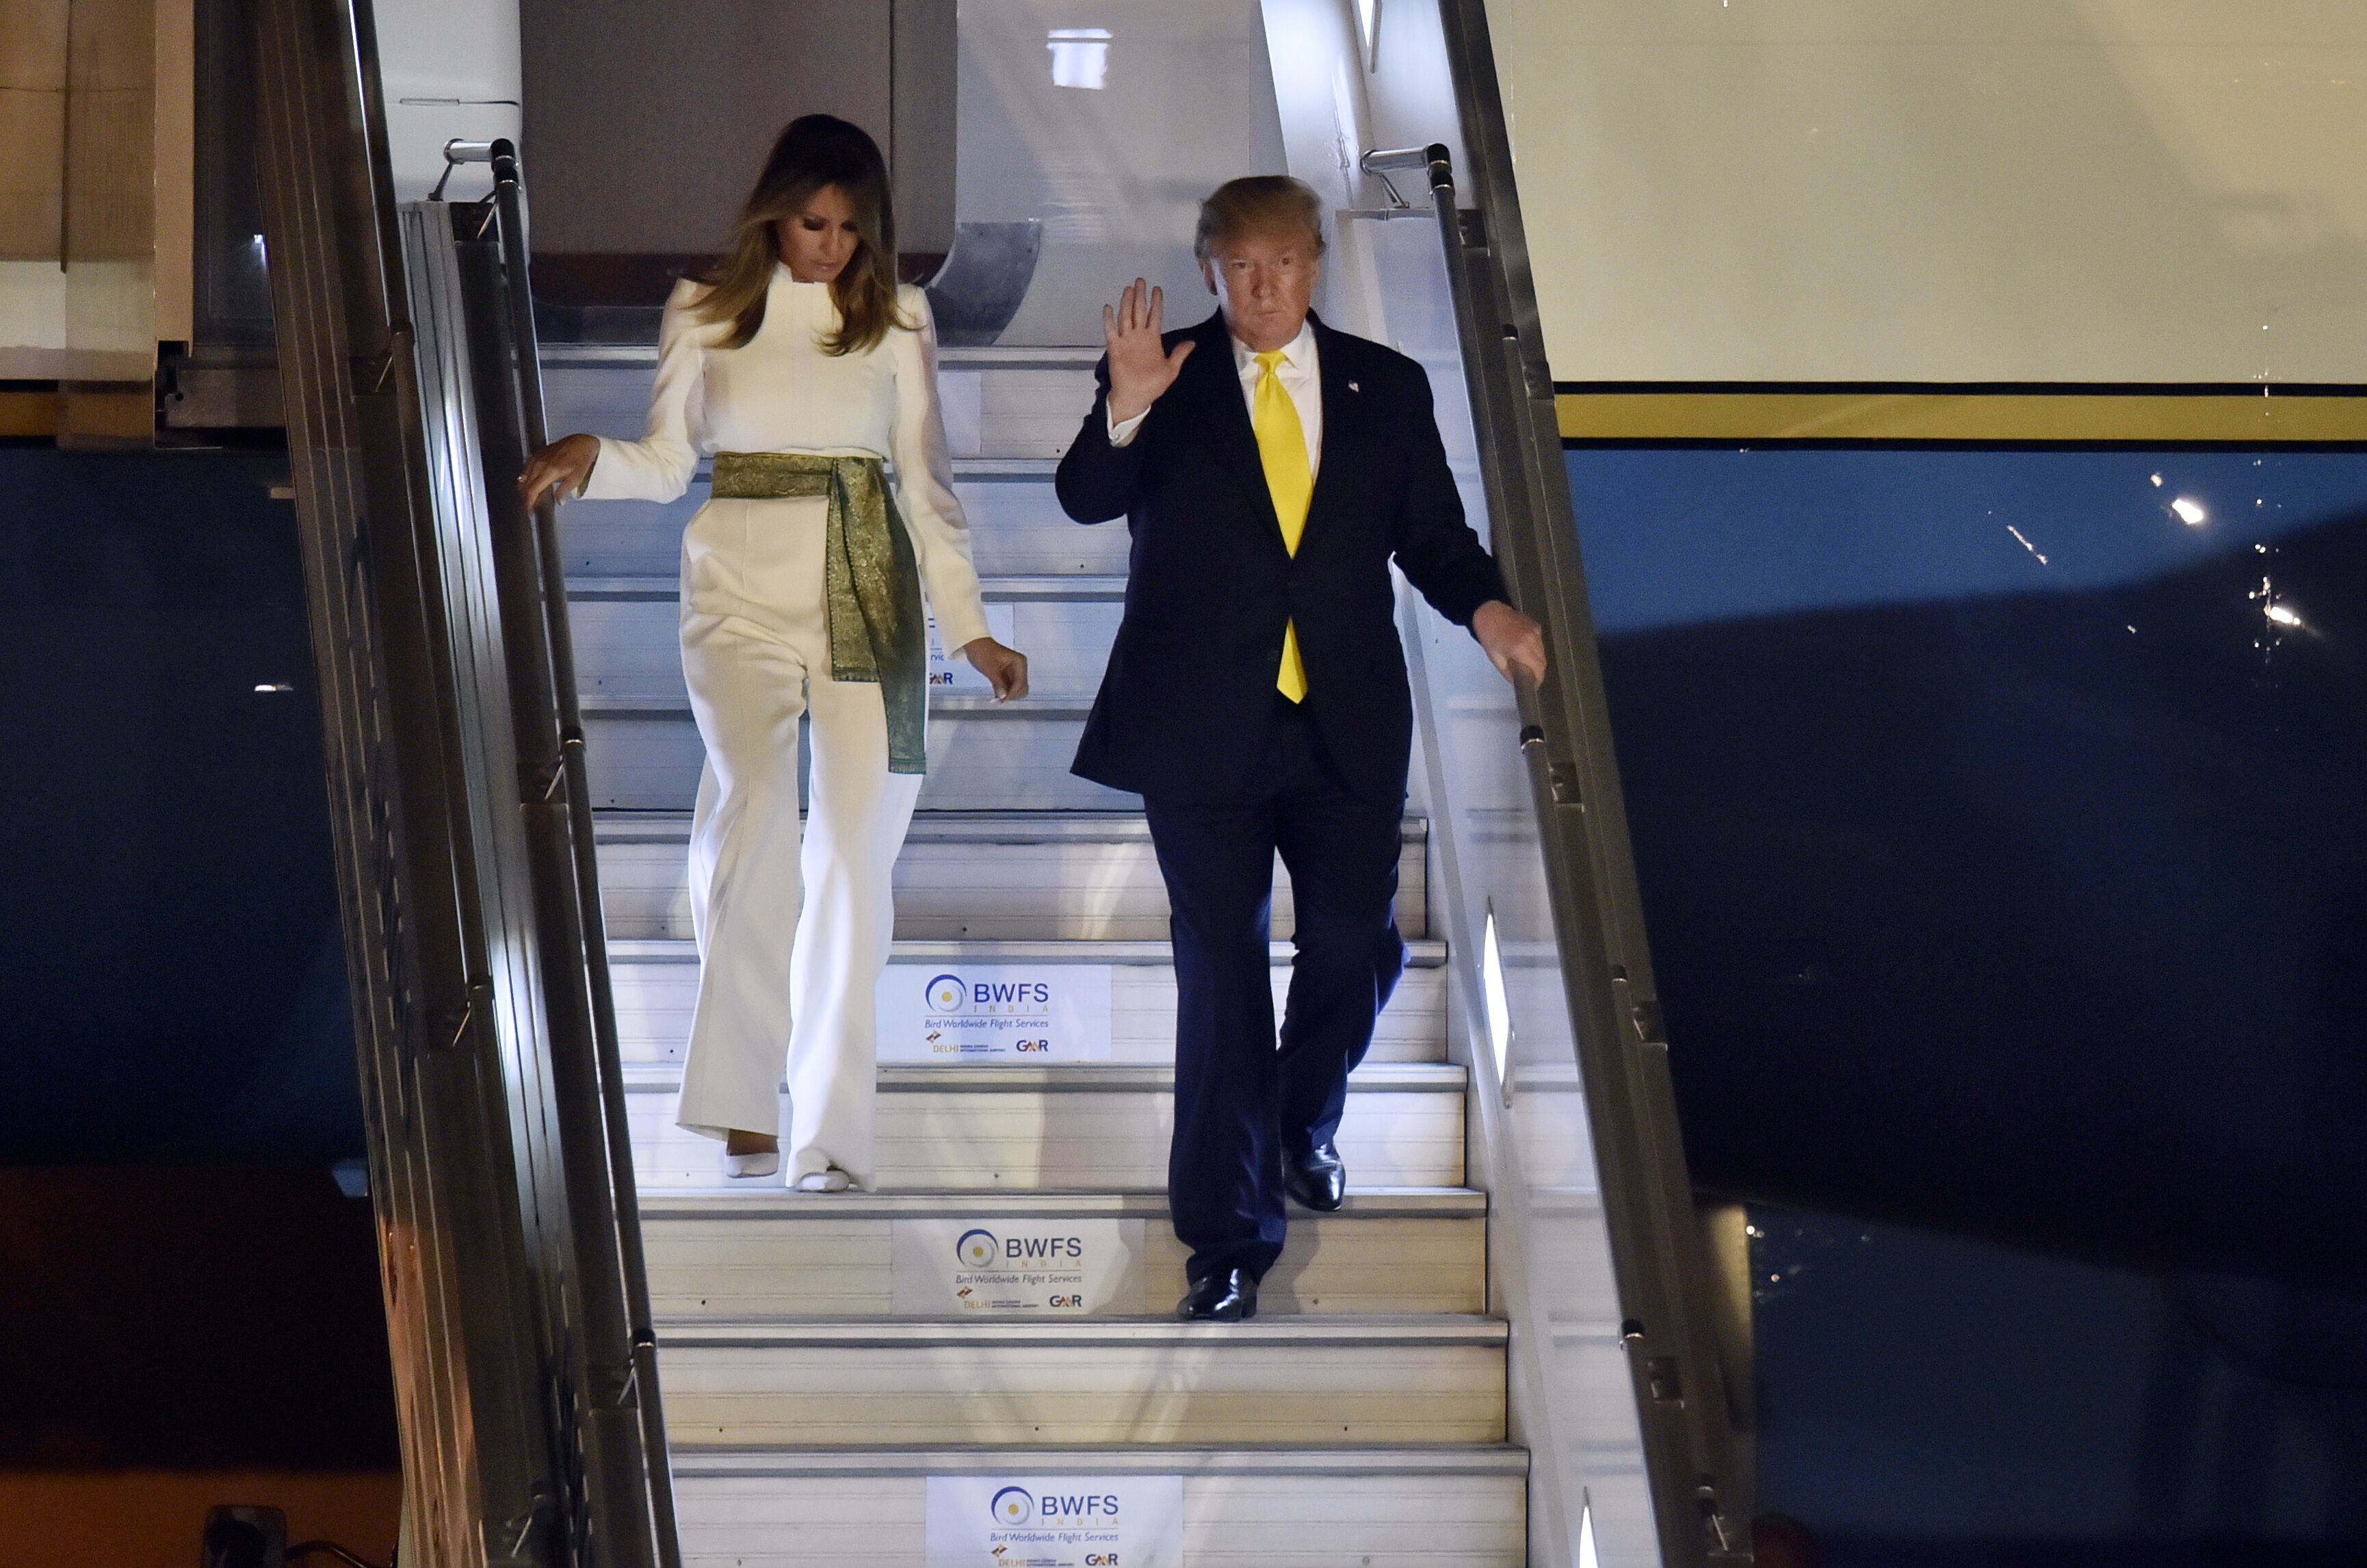 Melania and Donald Trump arrive at Air Force Station, Palam on February 24, 2020, in New Delhi, India | Photo: Ajay Aggarwal/Hindustan Times/Getty Images